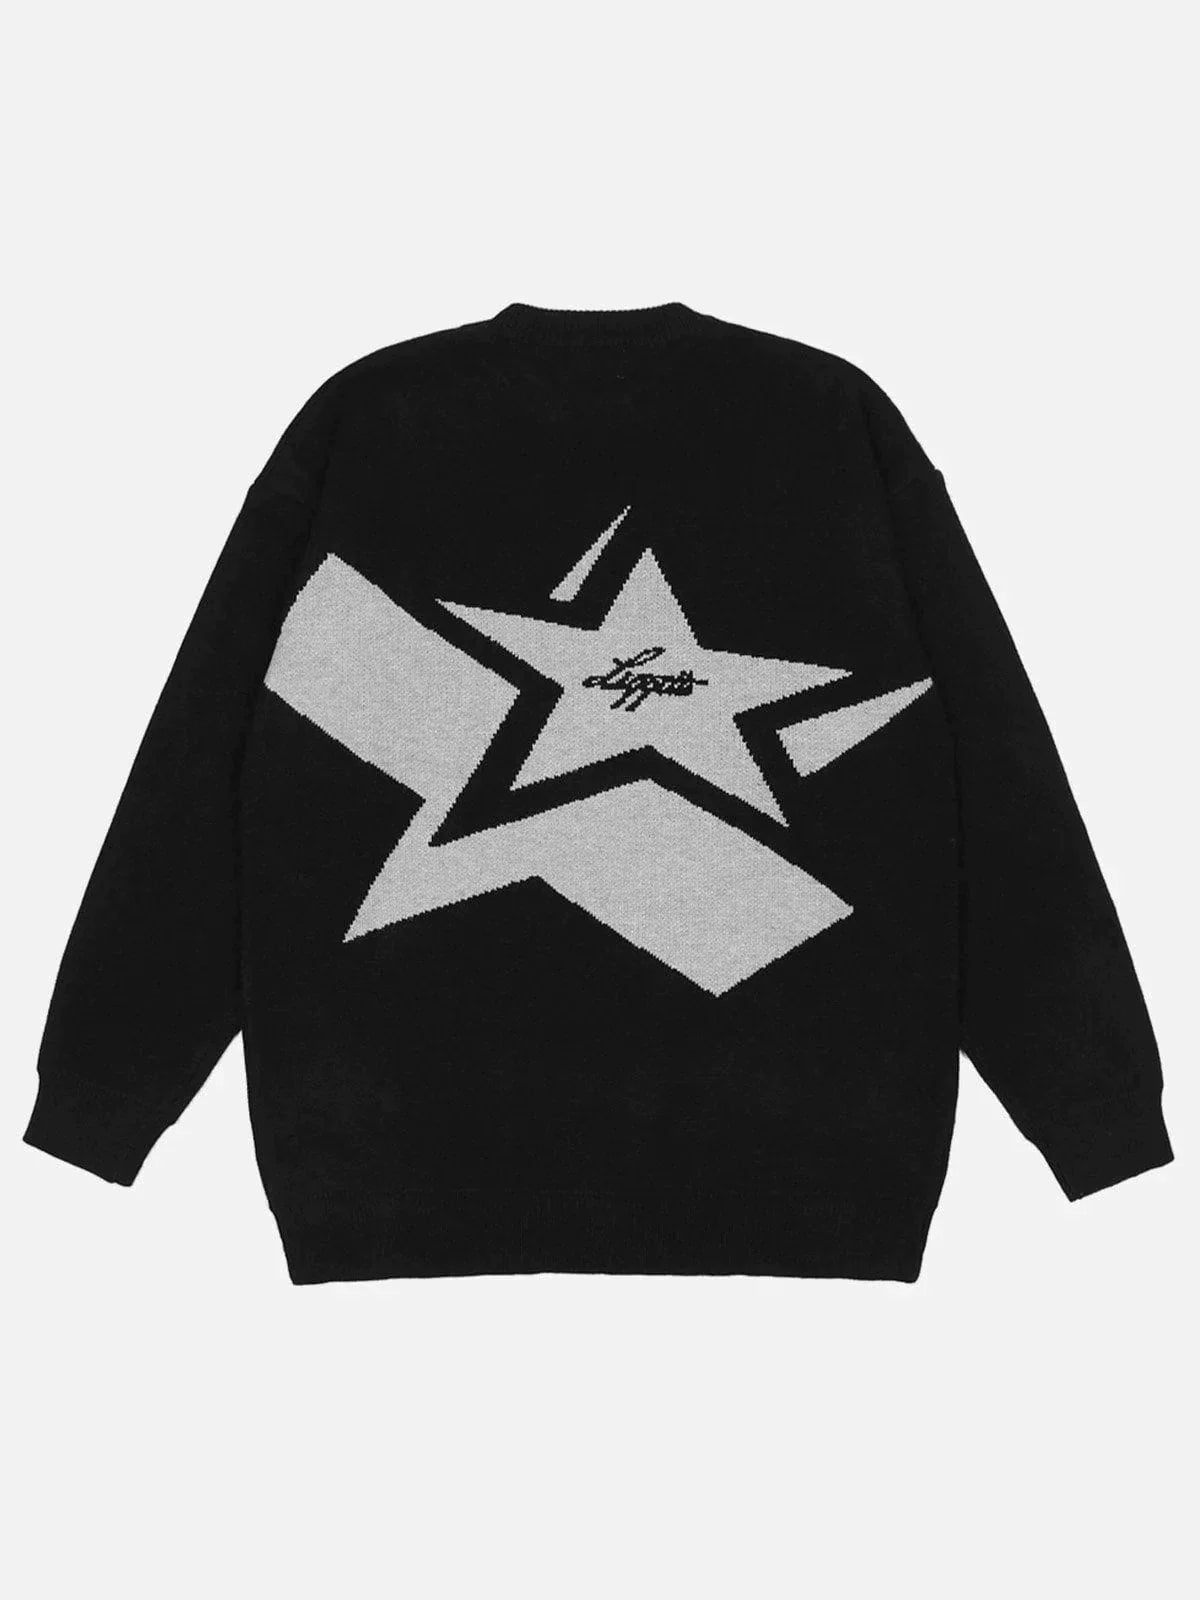 Majesda® - Vintage Pullover Sweater outfit ideas streetwear fashion